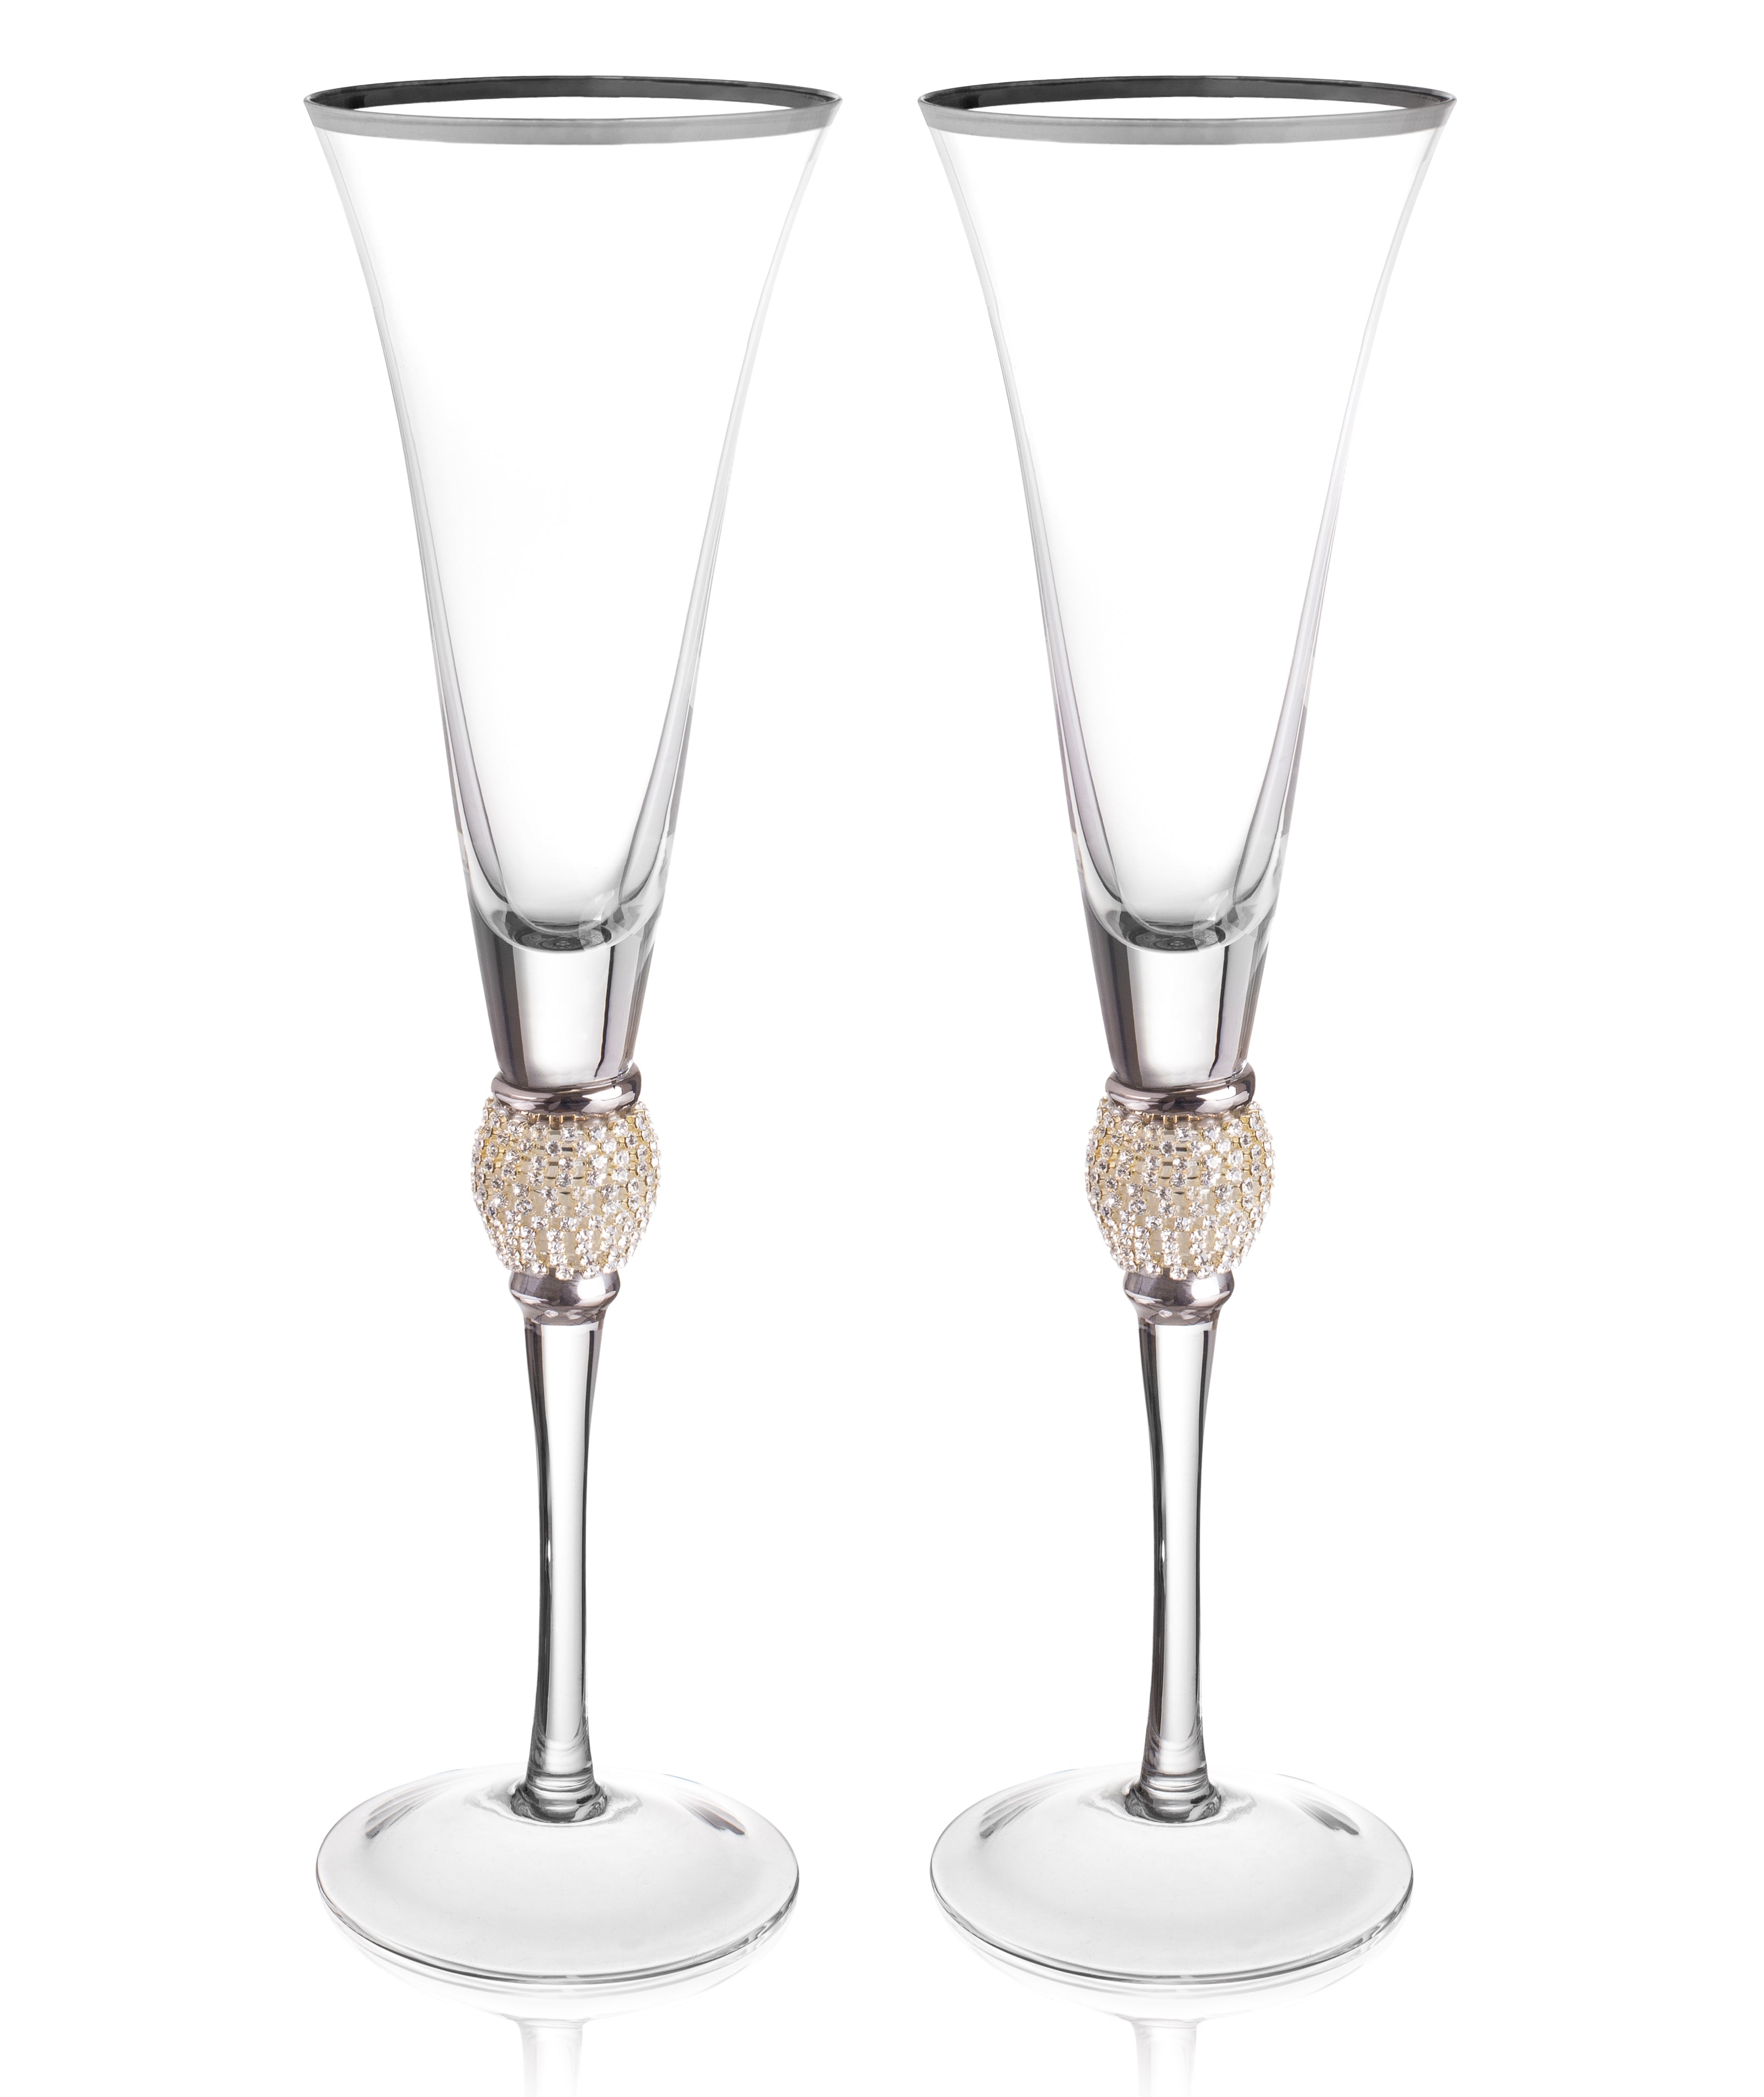 Two's Company Set of 2 Metallic Glass Champagne Flutes (Fancy/Cheers)